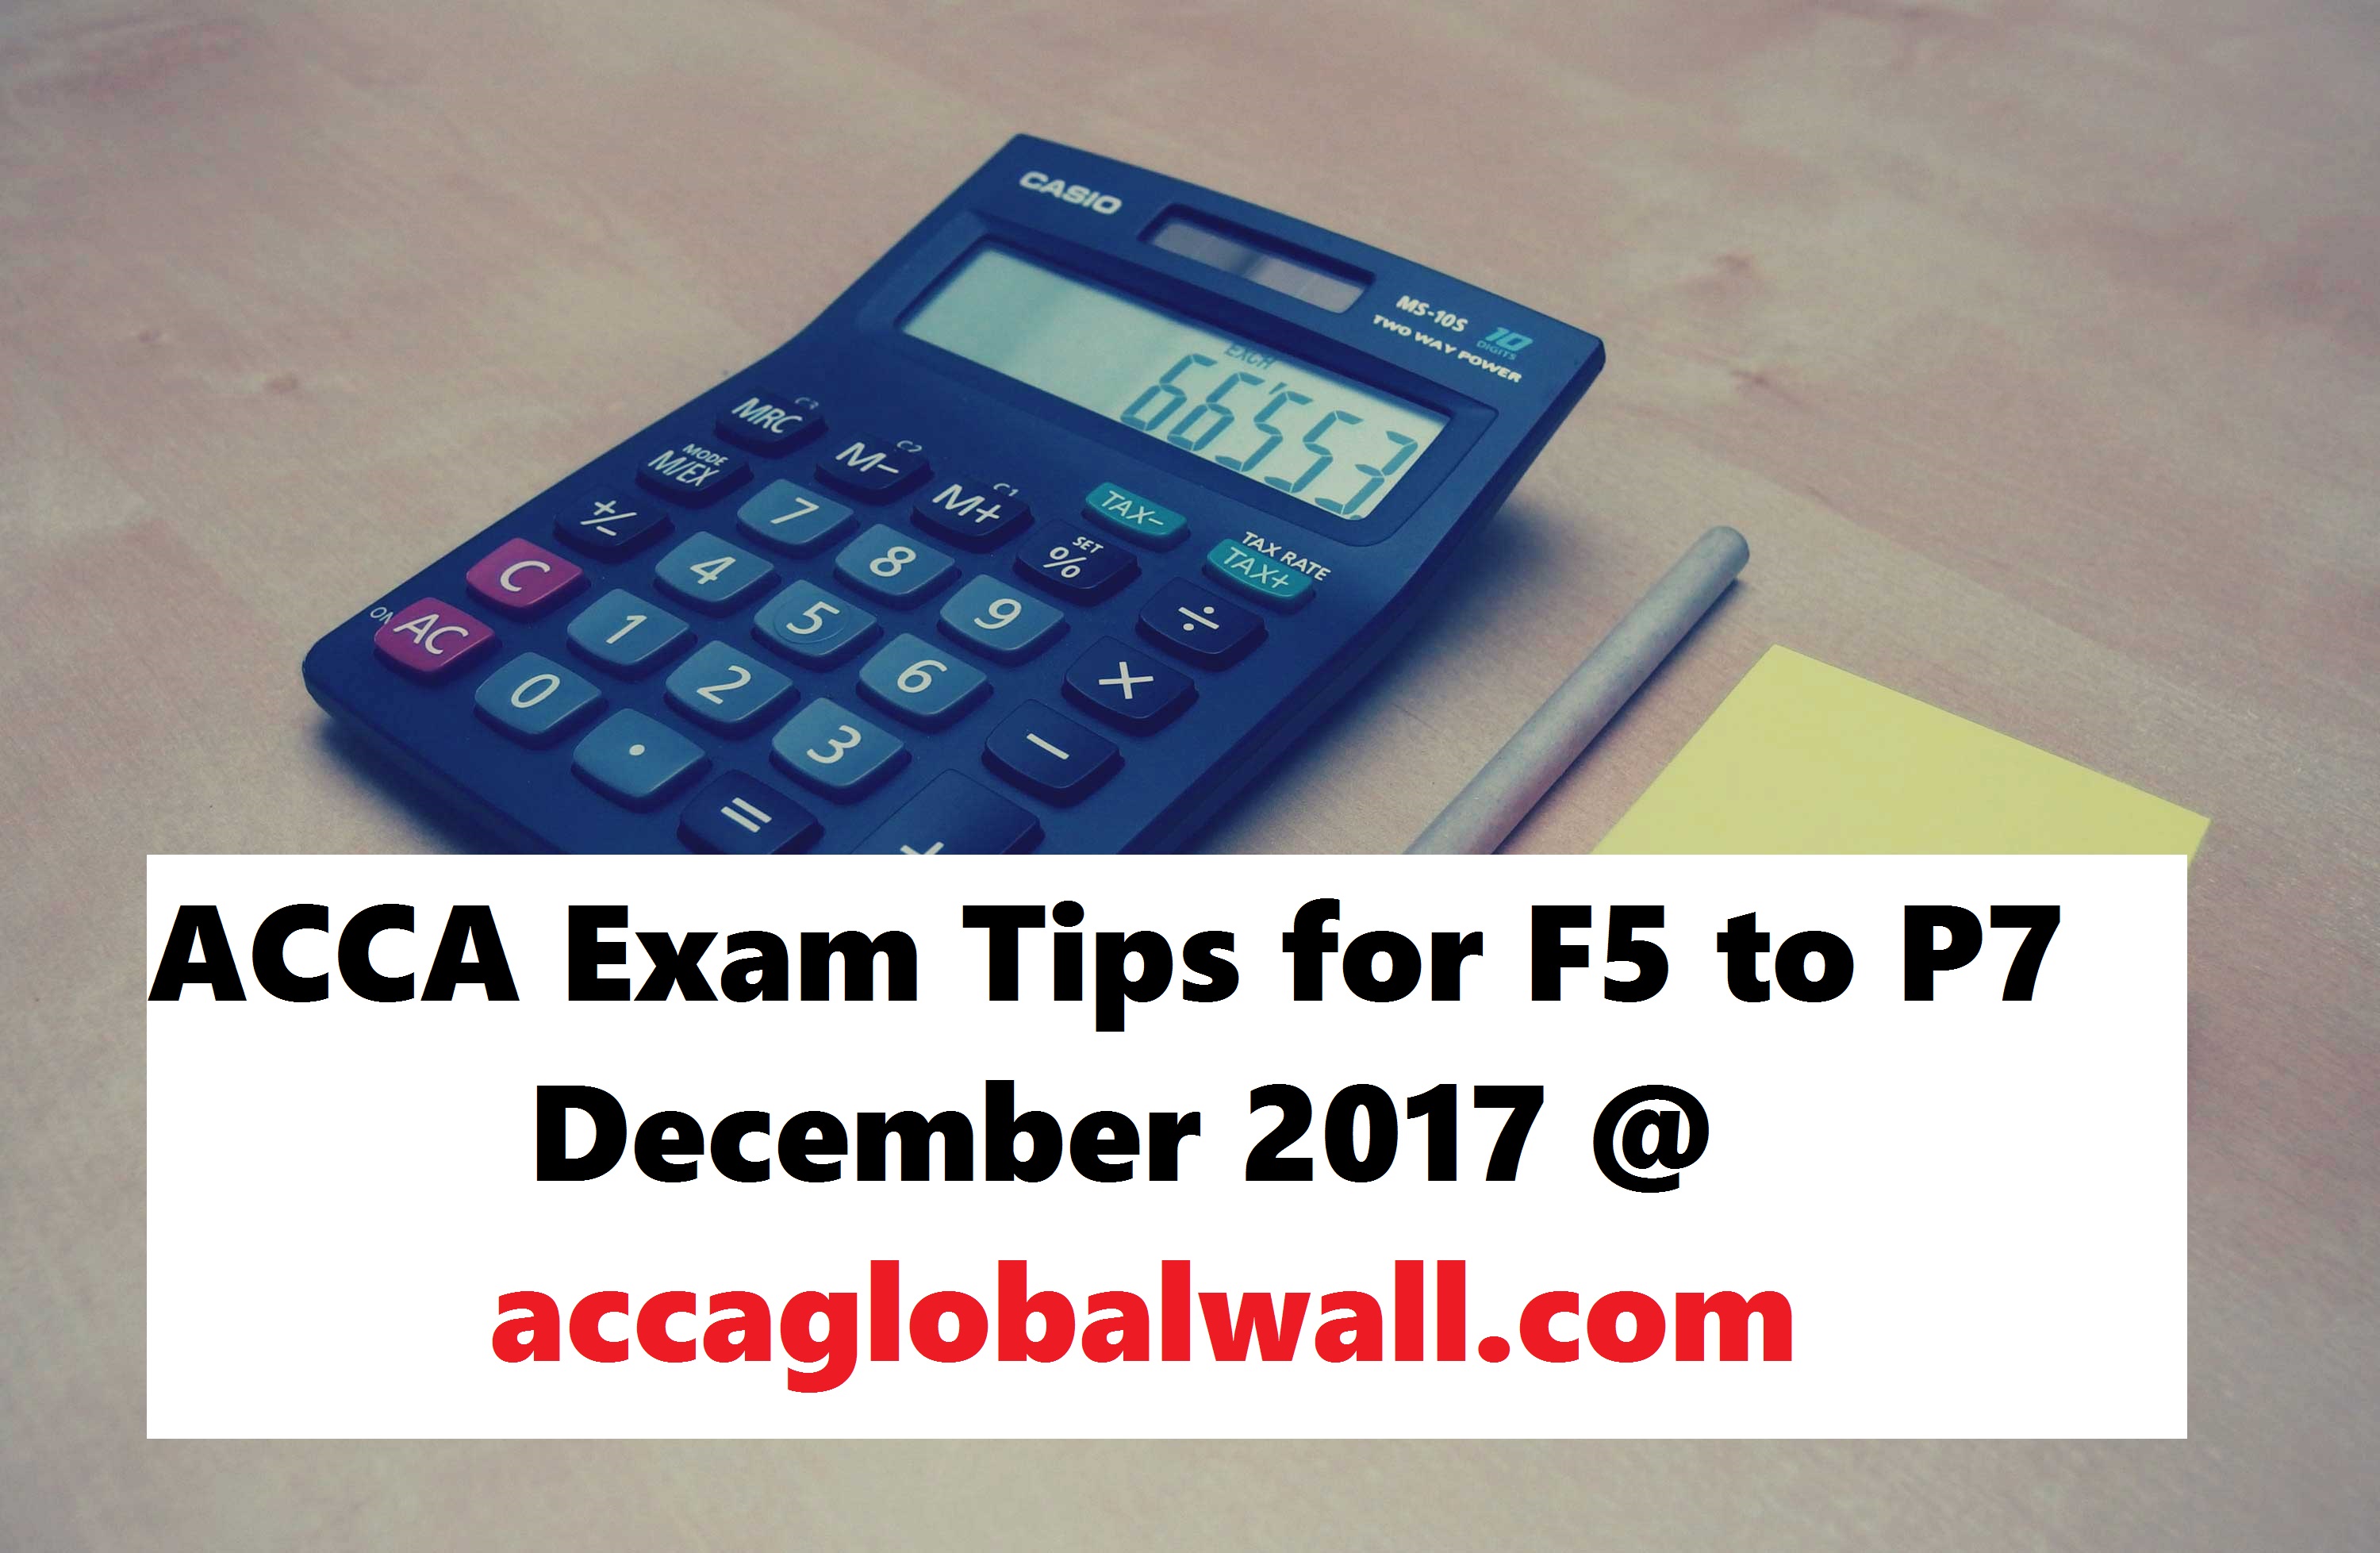 ACCA Exam Tips for F5 to P7 December 2017